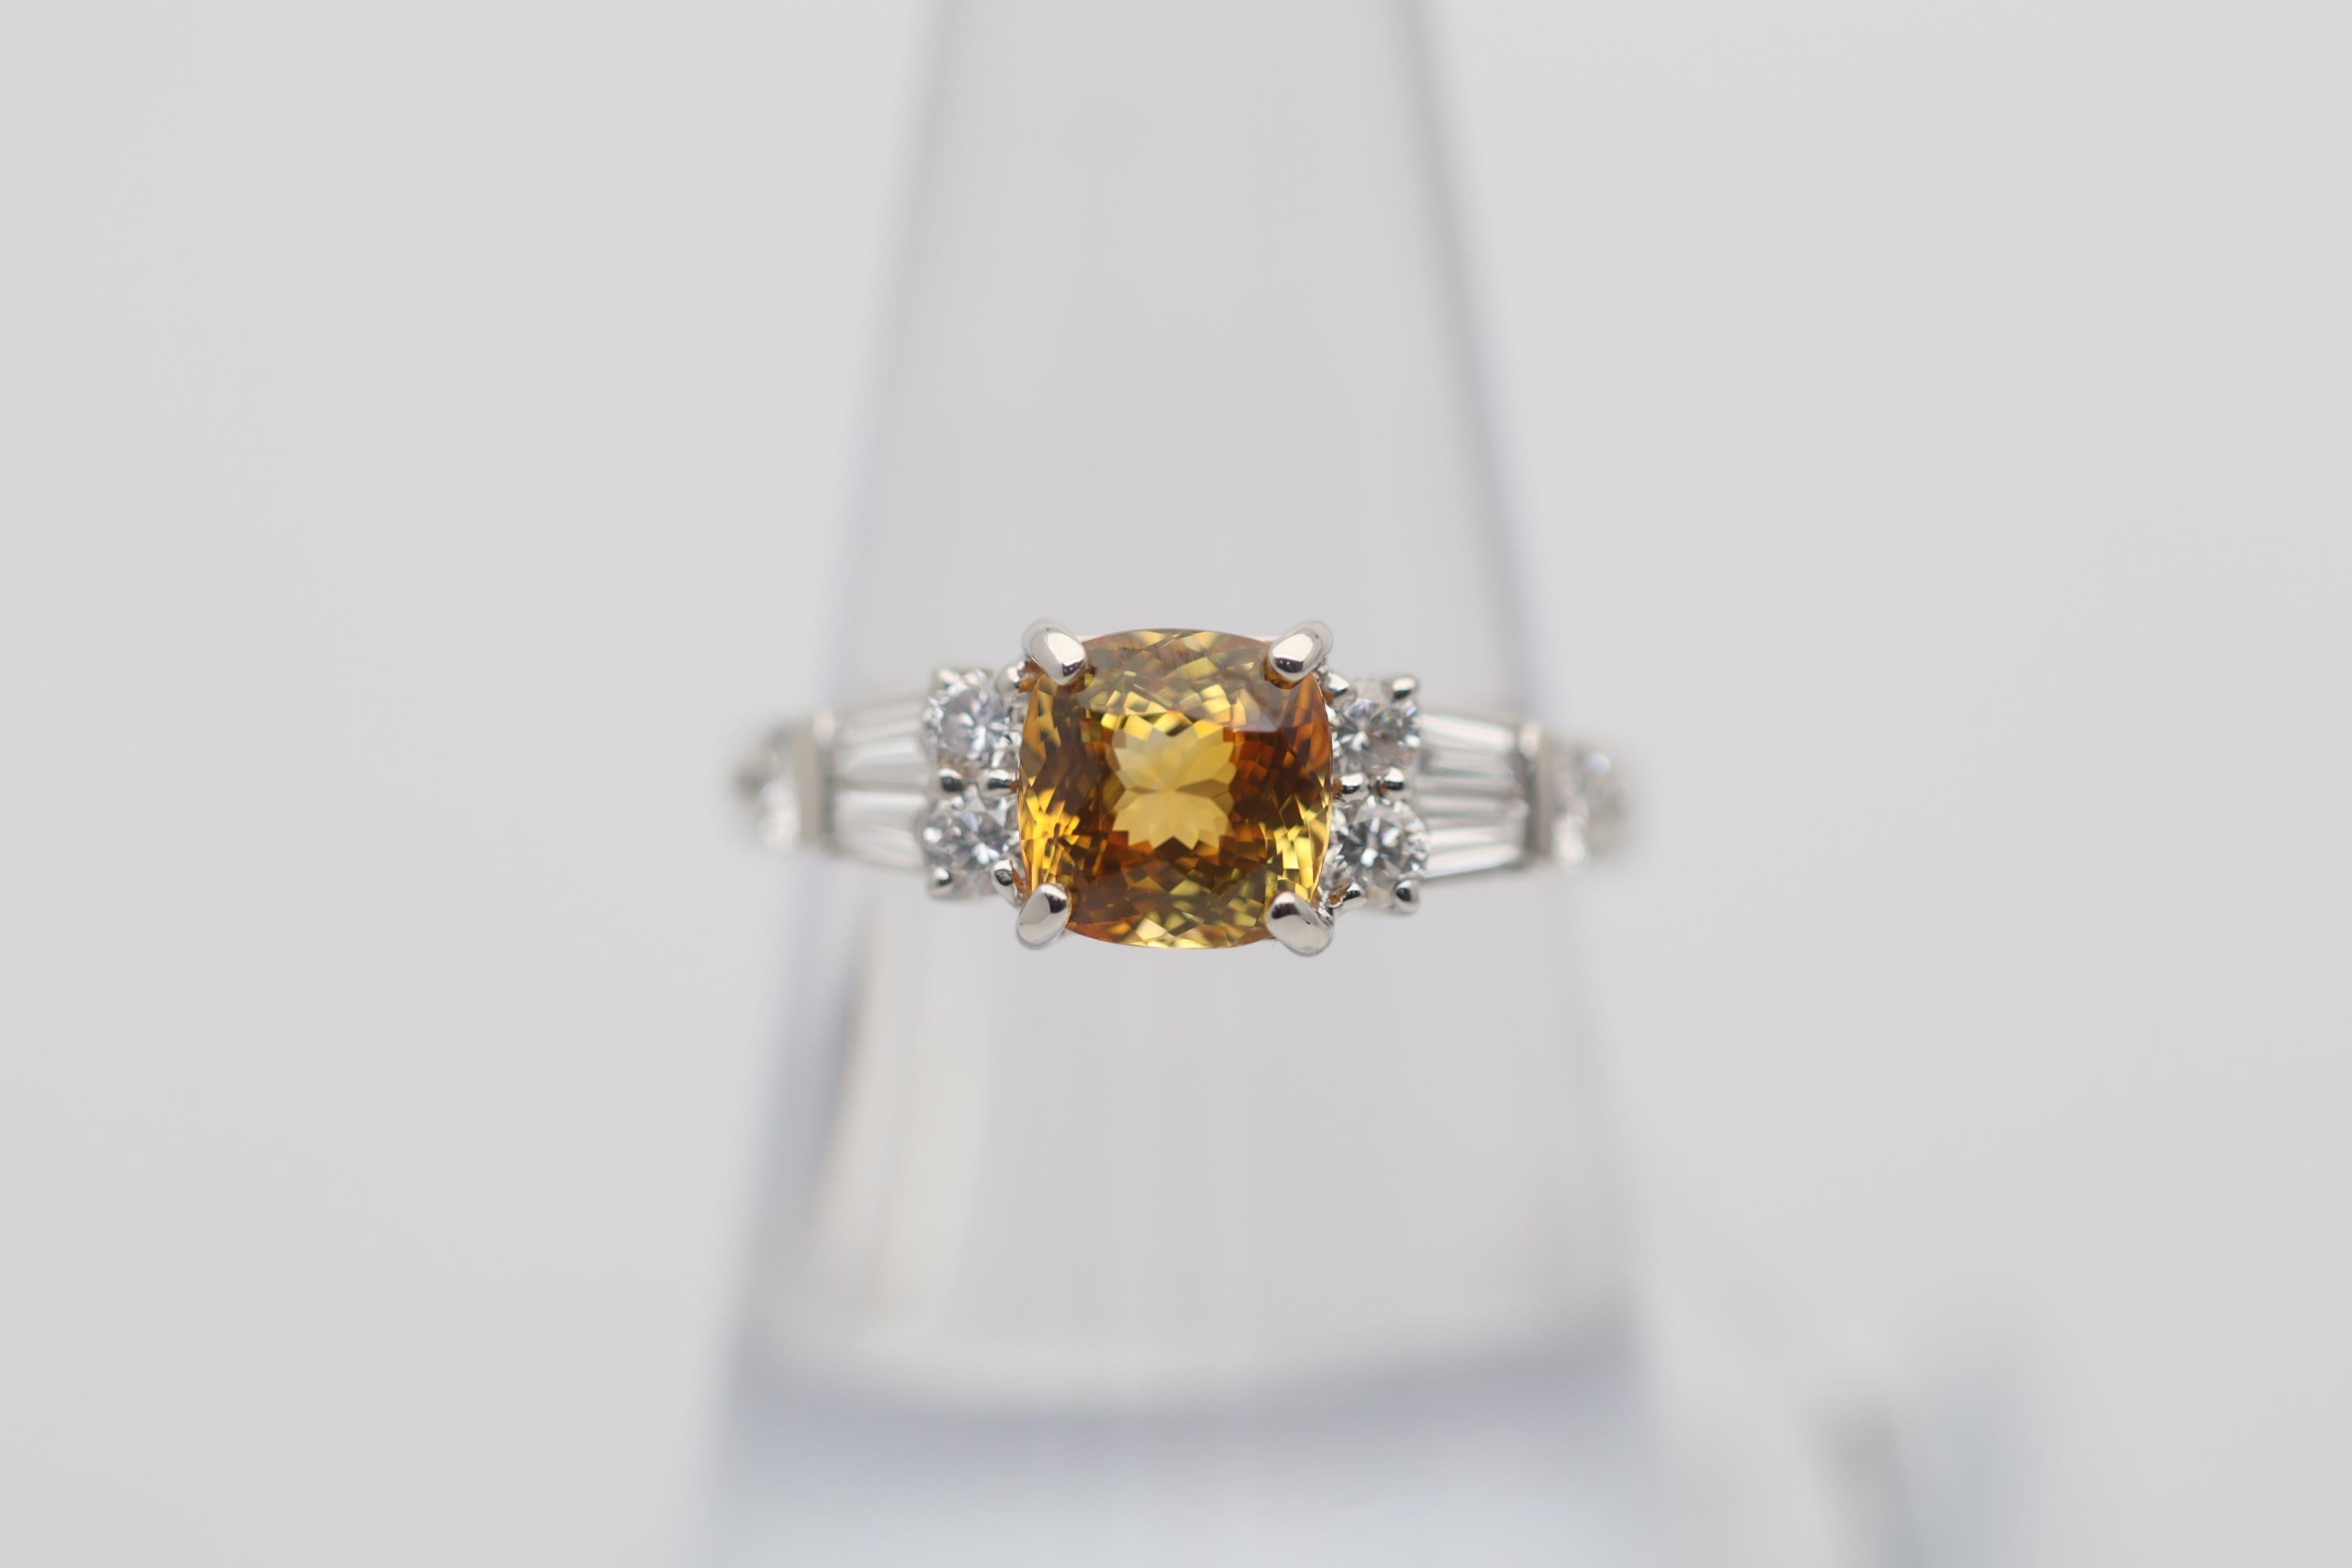 A sweet and stylish ring featuring a 2.00 carat fancy colored sapphire with a vibrant orange-yellow color. It has a brilliant cushion-shape giving the stone excellent scintillation and light return. It is complemented by 0.62 carats round-brilliant